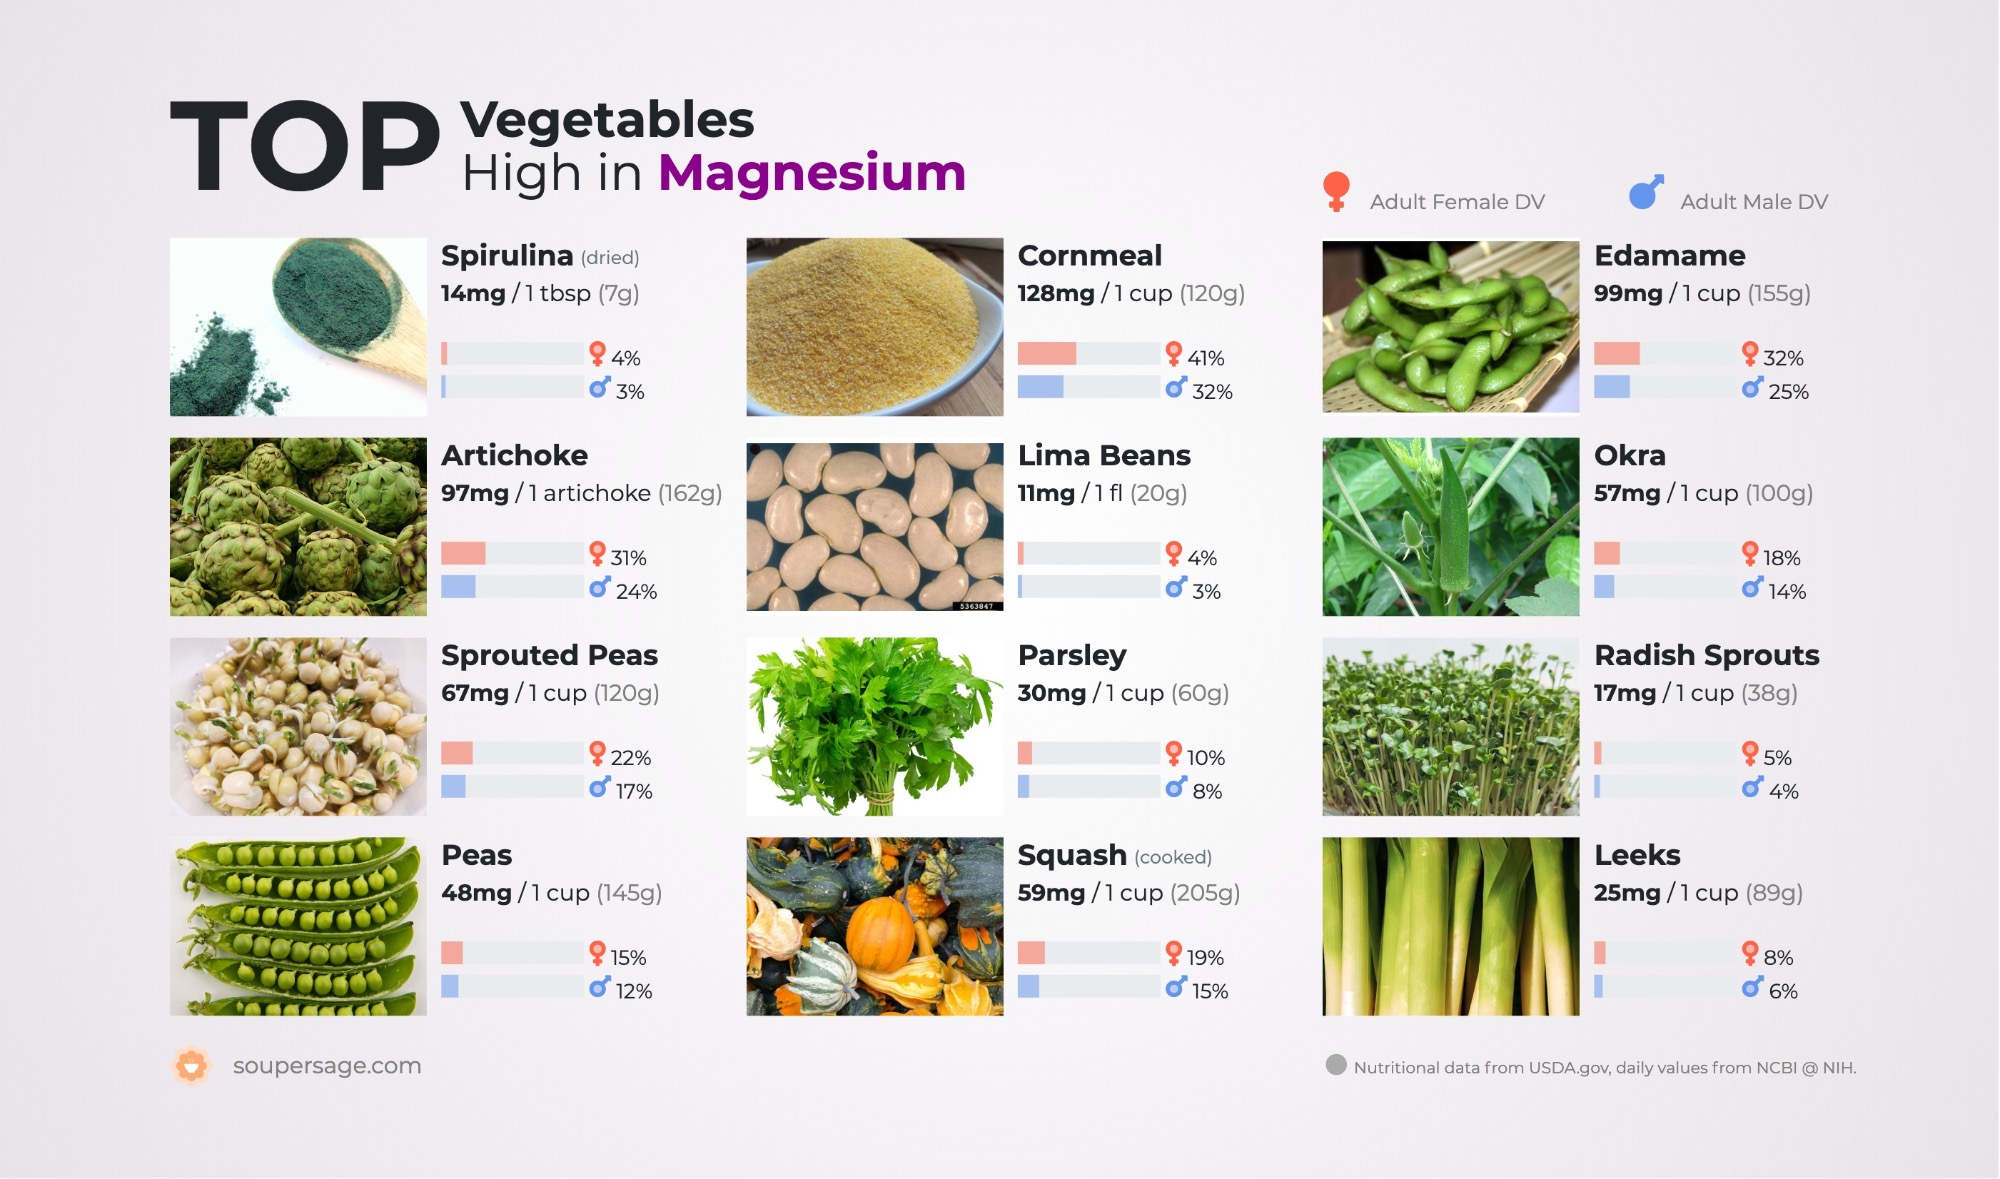 image of Top Vegetables High in Magnesium